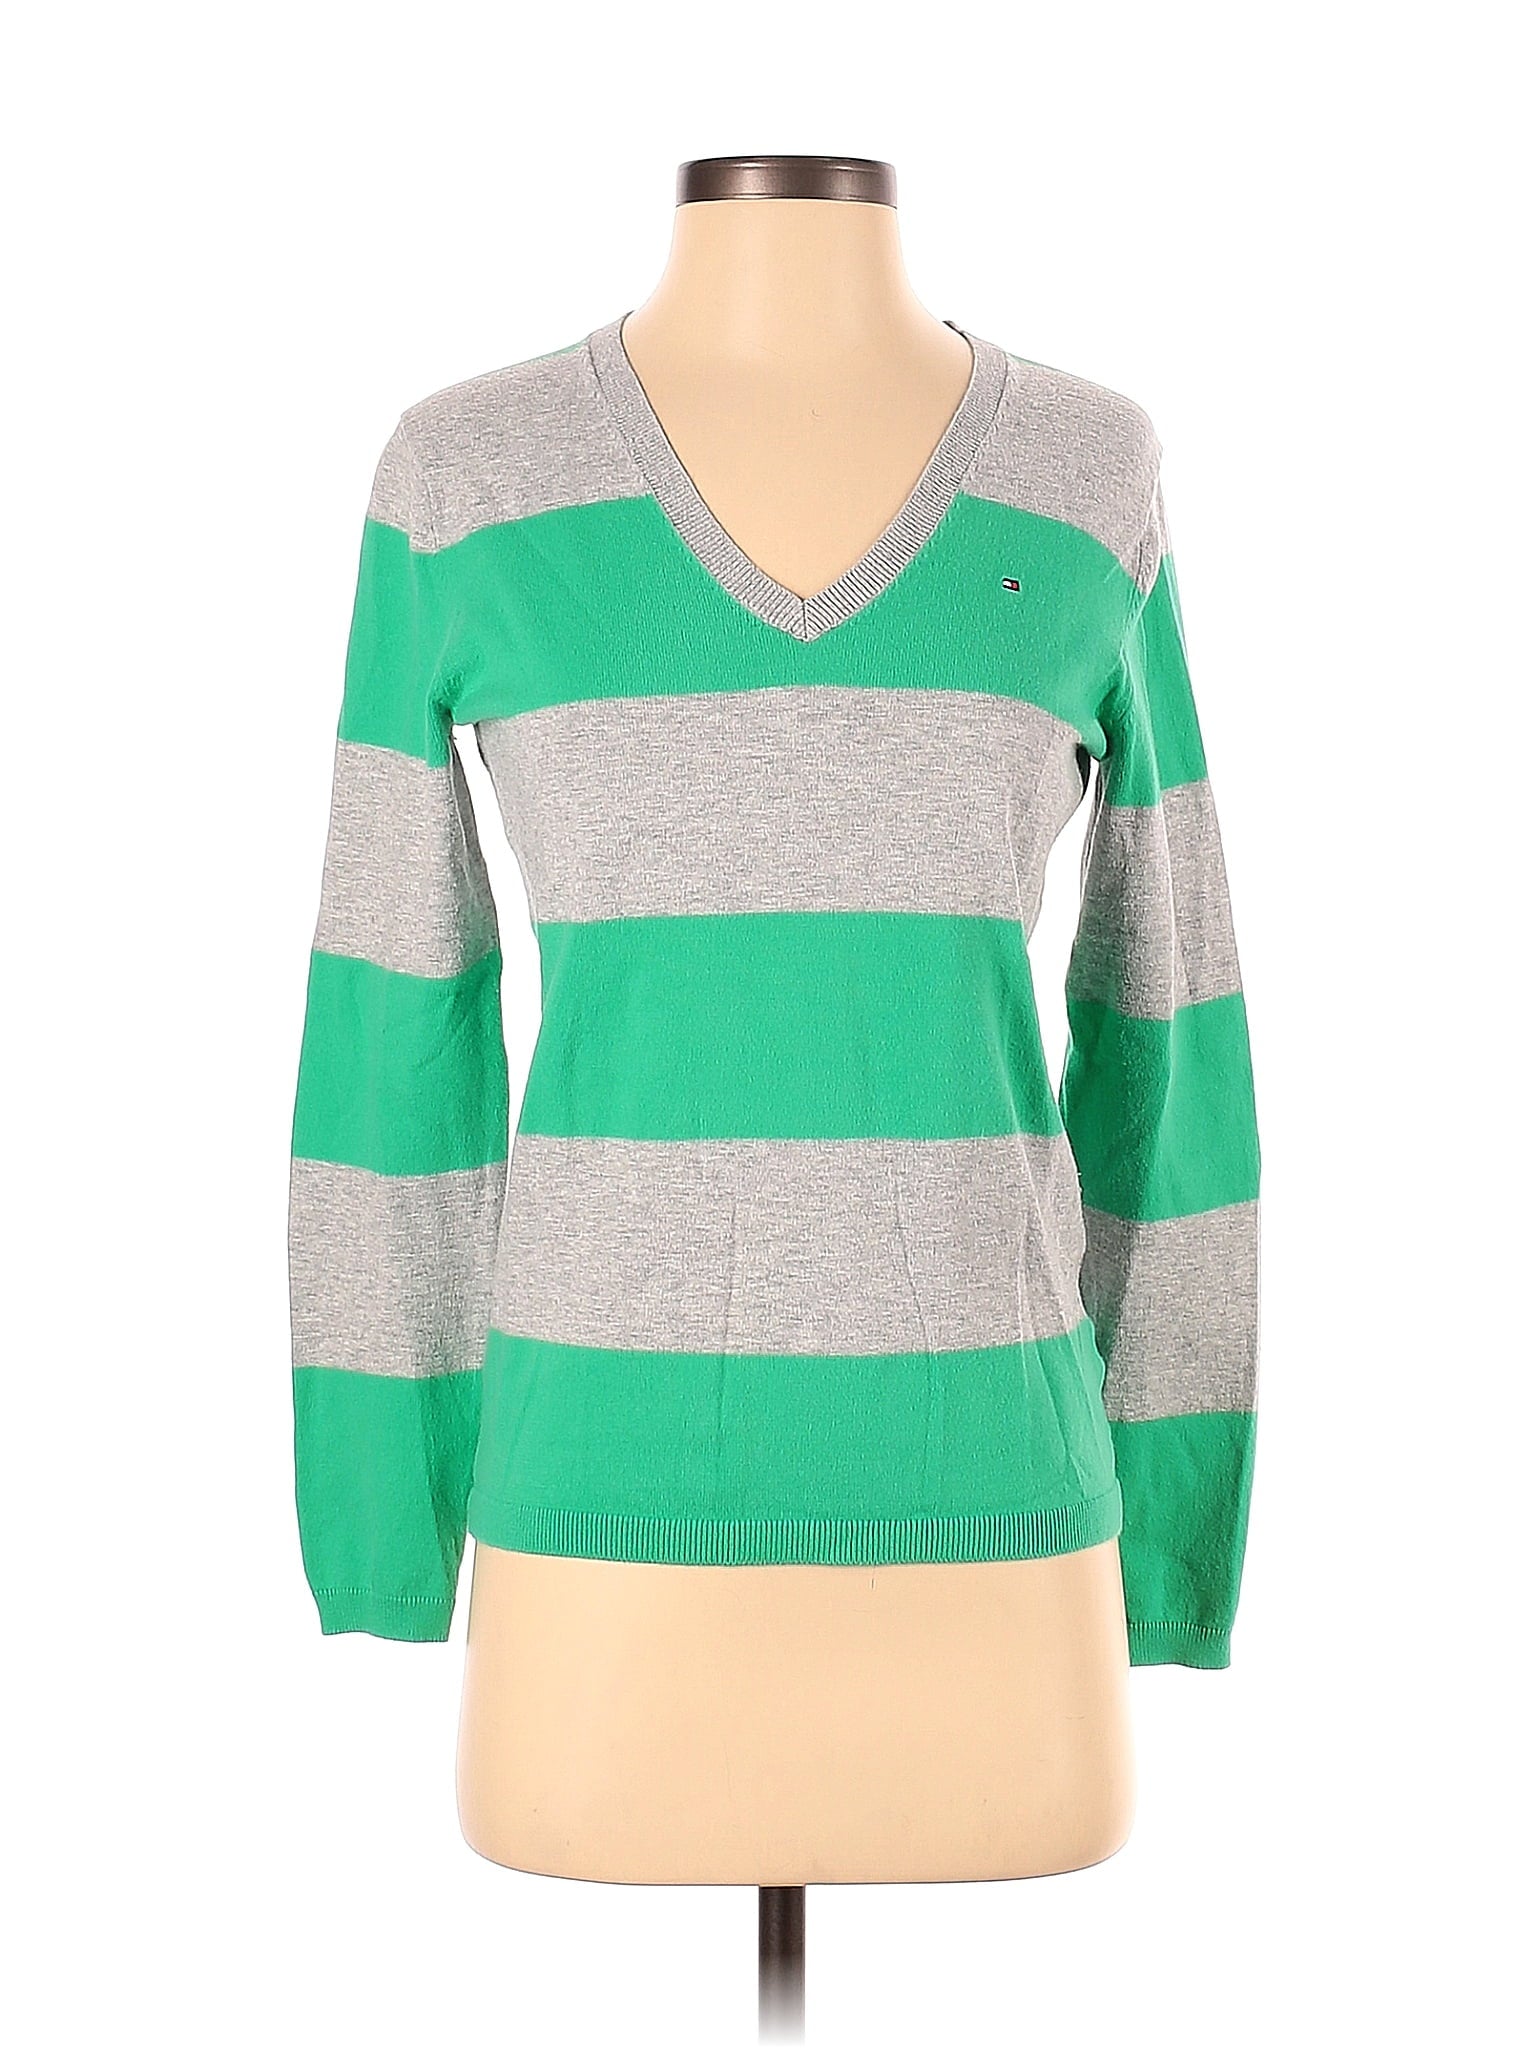 Pullover Sweater size - S